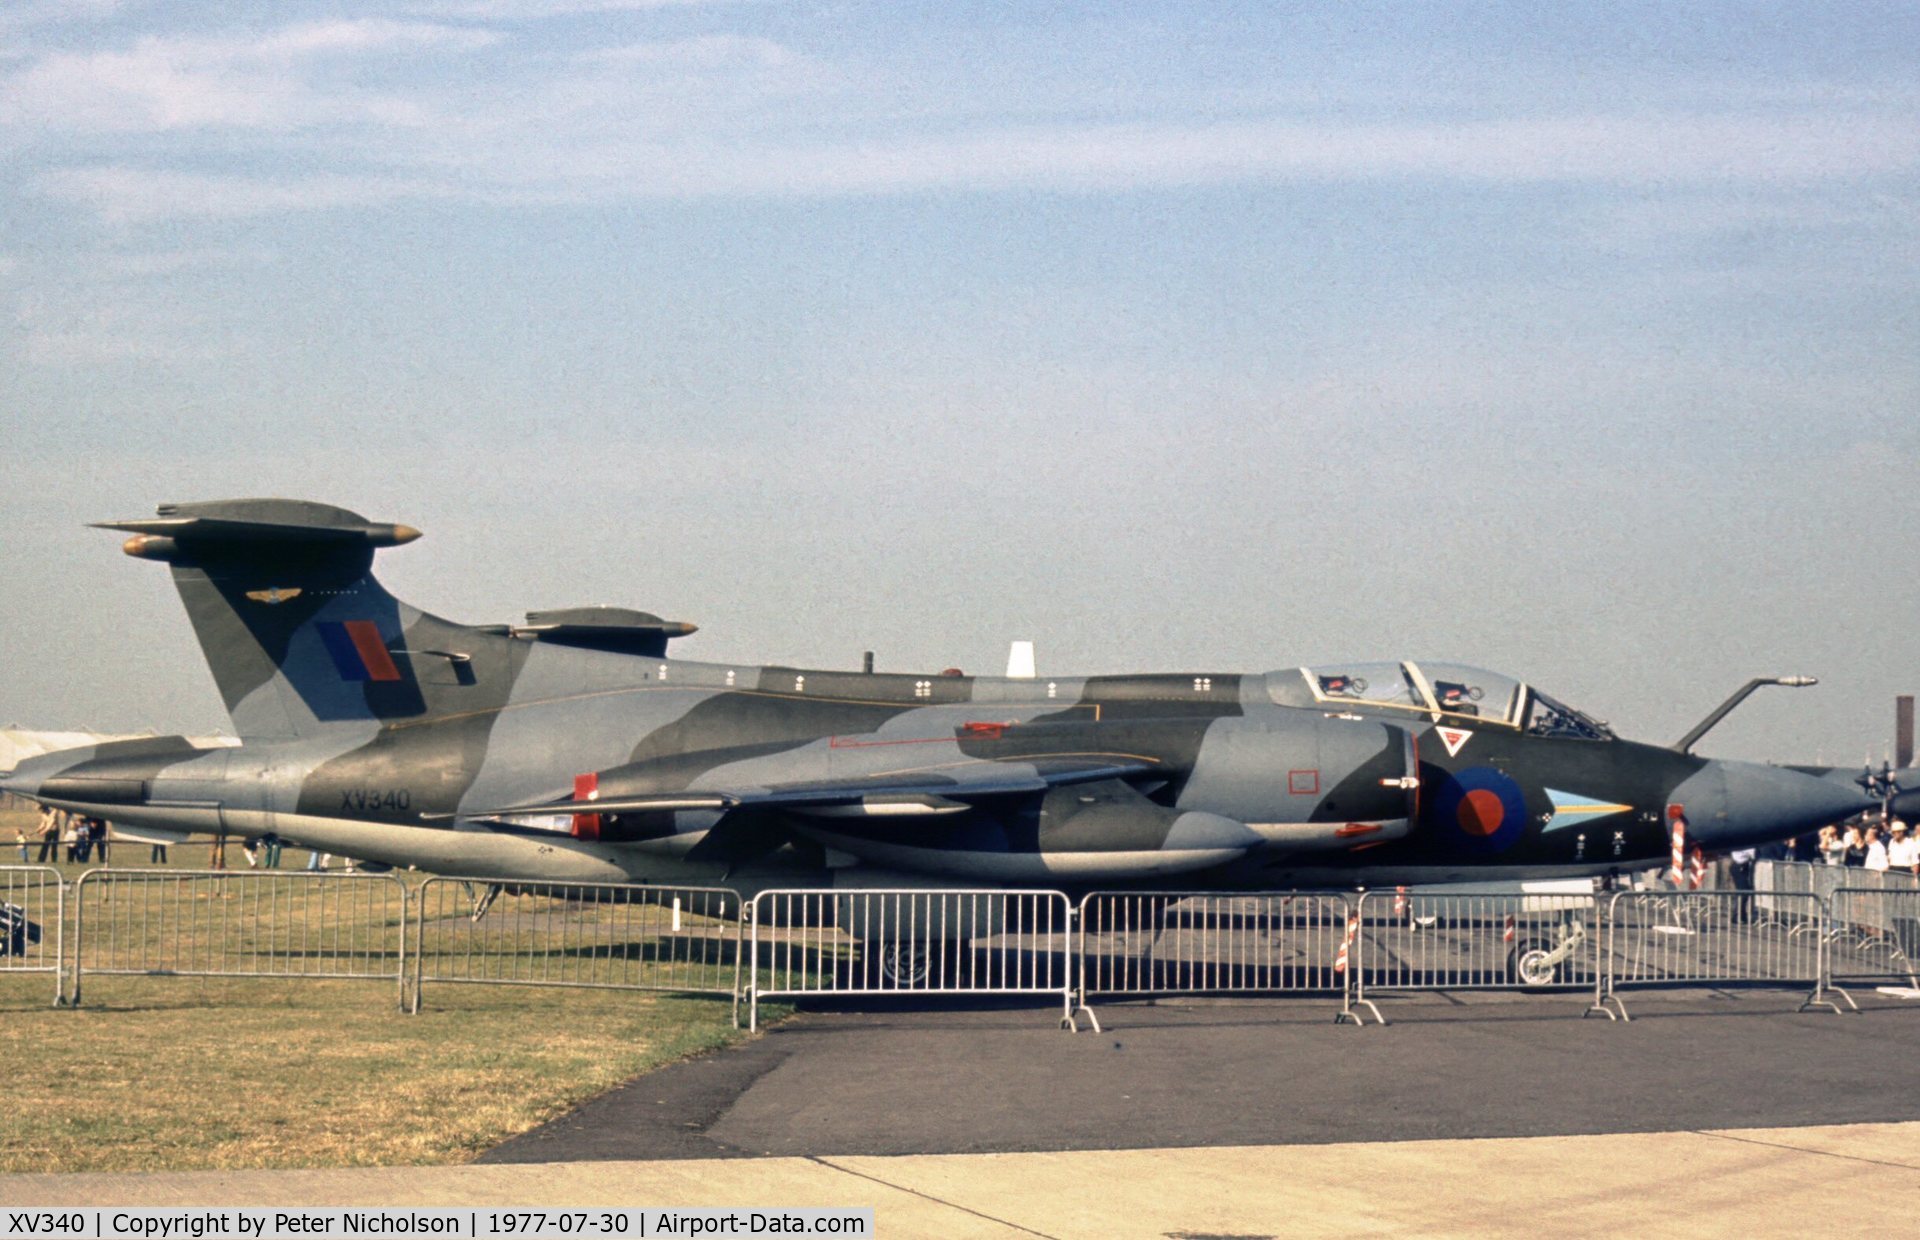 XV340, 1967 Hawker Siddeley Buccaneer S.2B C/N B3-18-66, Buccaneer S.2B of 208 Squadron on display at the 1977 Royal Review at RAF Finningley.